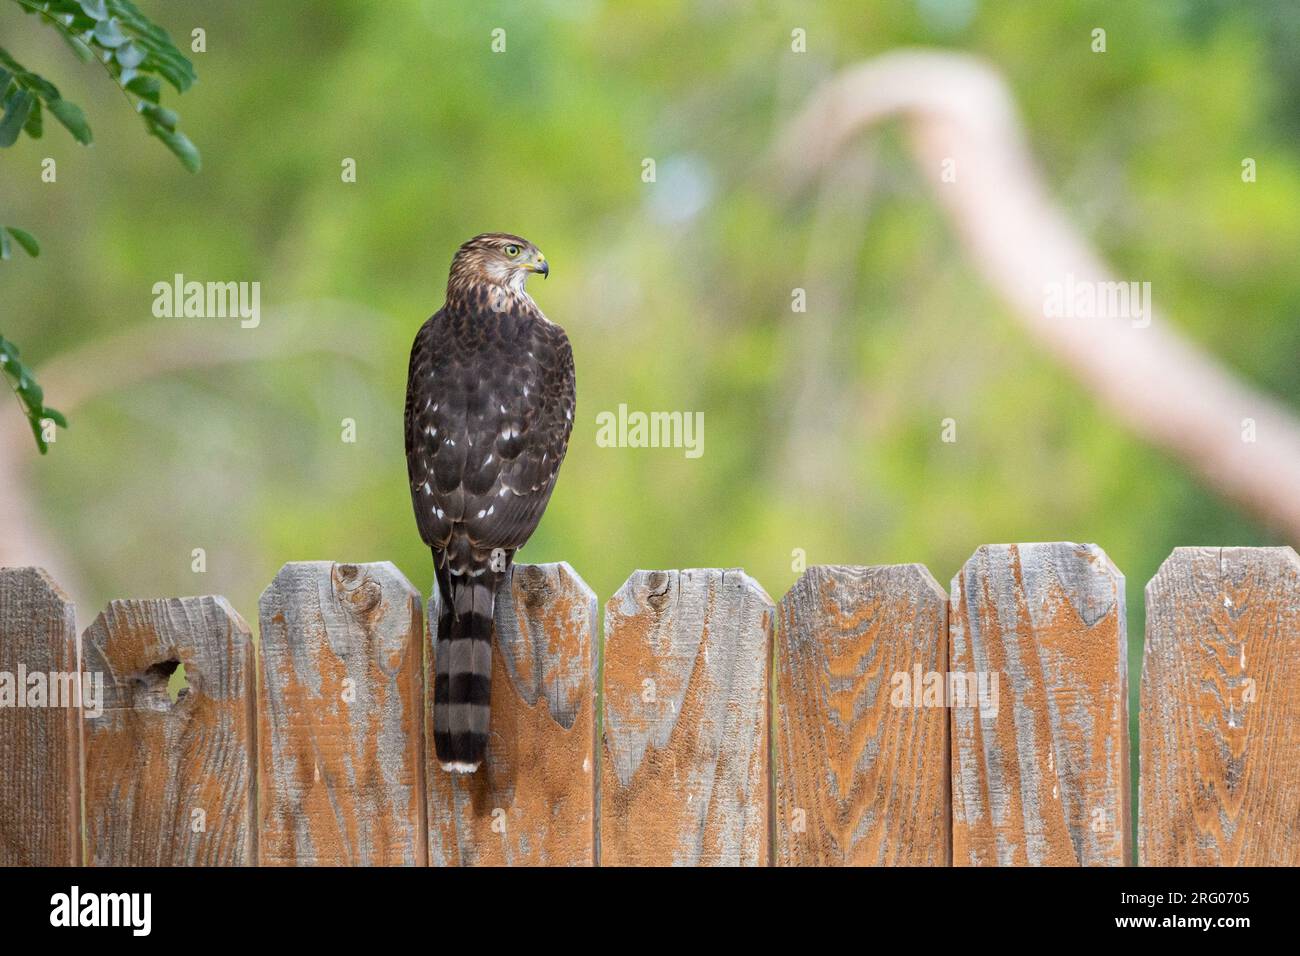 An immature Cooper's hawk (Accipiter cooperii) sits on a wooden fence. Stock Photo